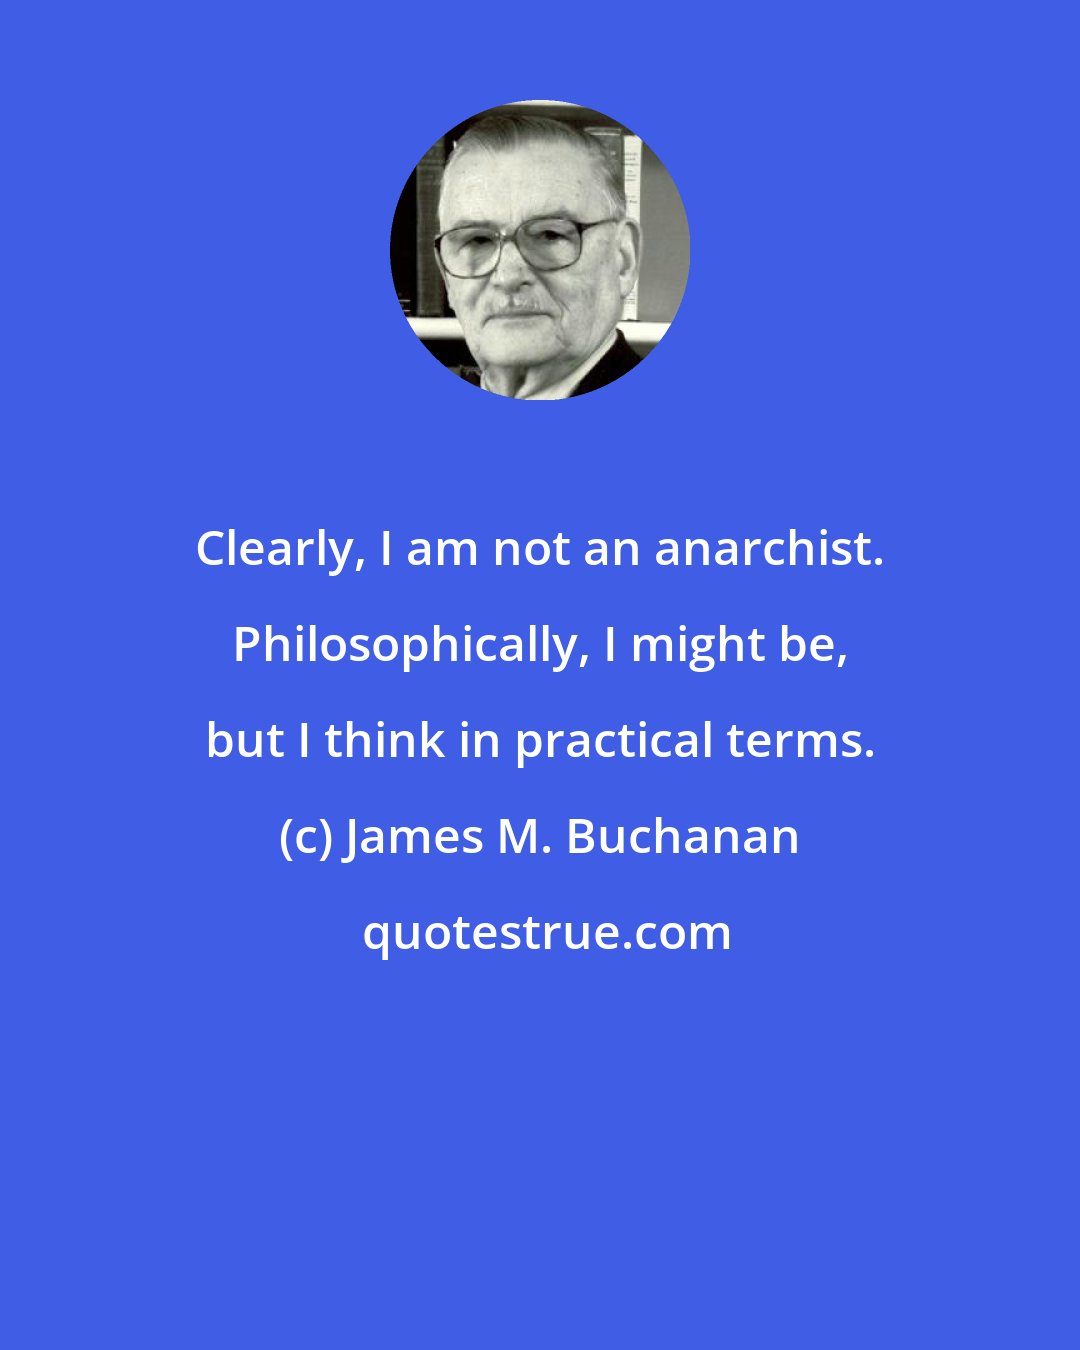 James M. Buchanan: Clearly, I am not an anarchist. Philosophically, I might be, but I think in practical terms.